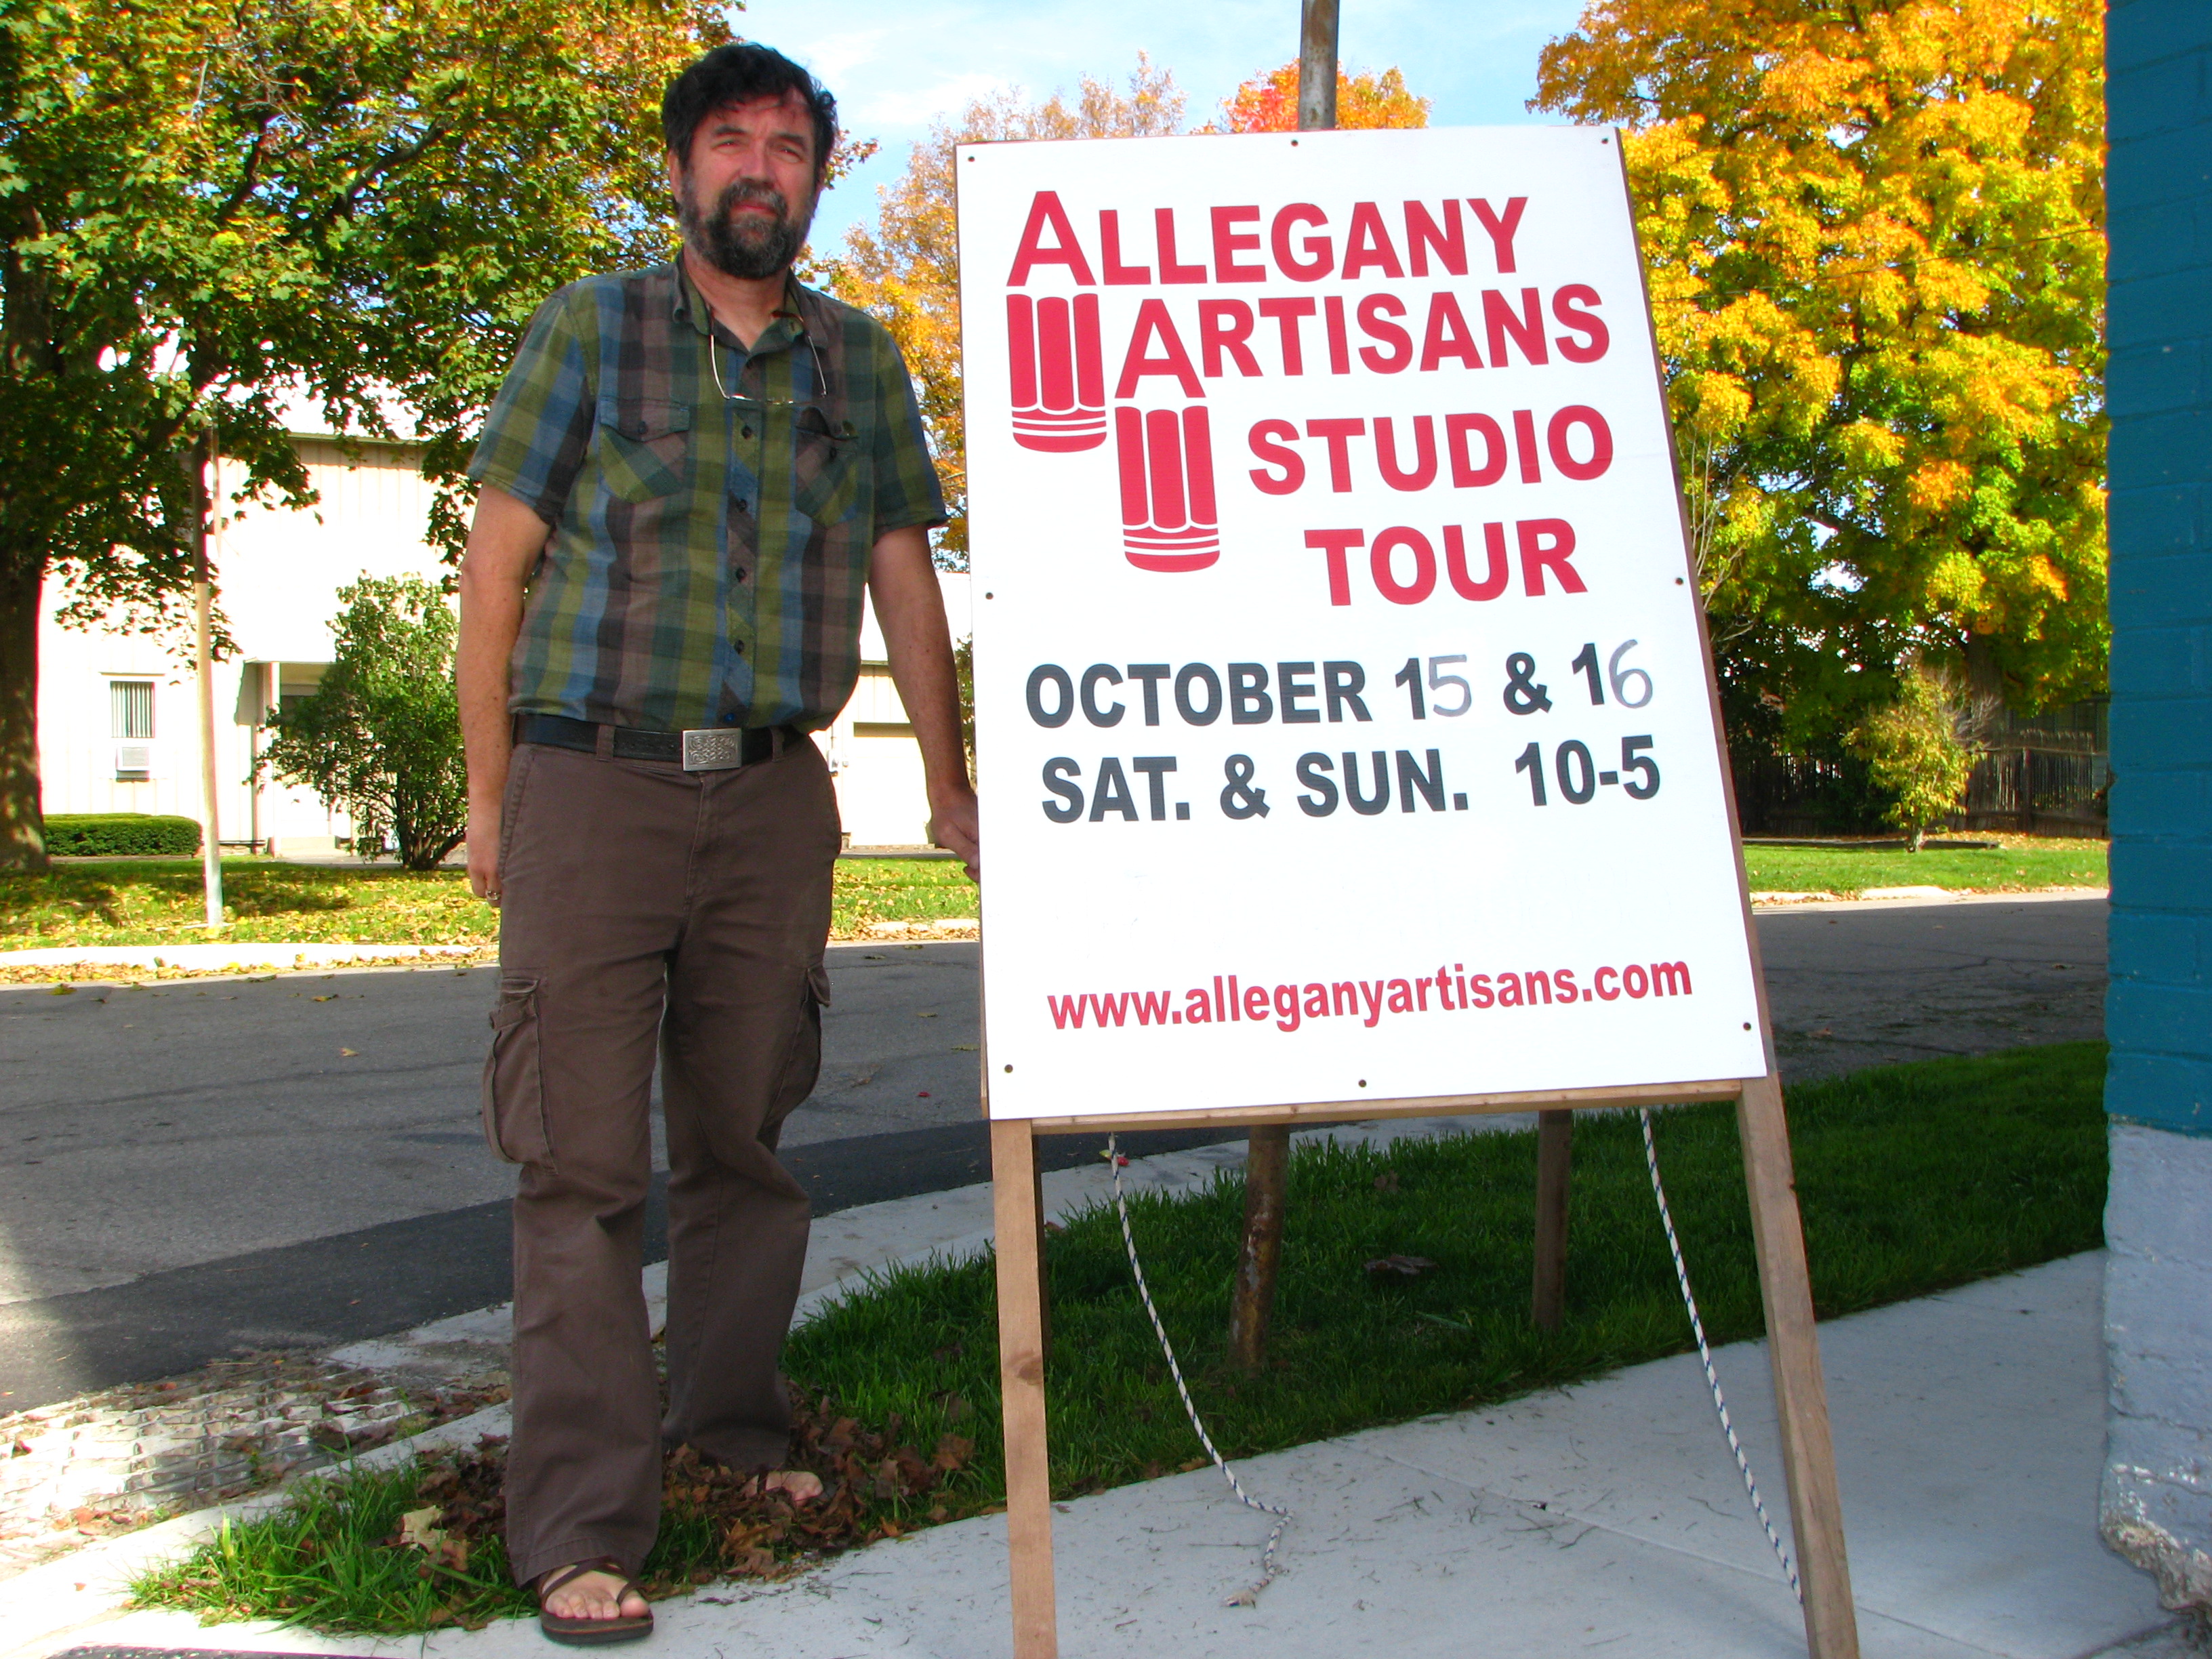 Look for these signs to find the studios of the Allegany Artisans during the 26th annual Studio Tour October 19 & 20, 2013